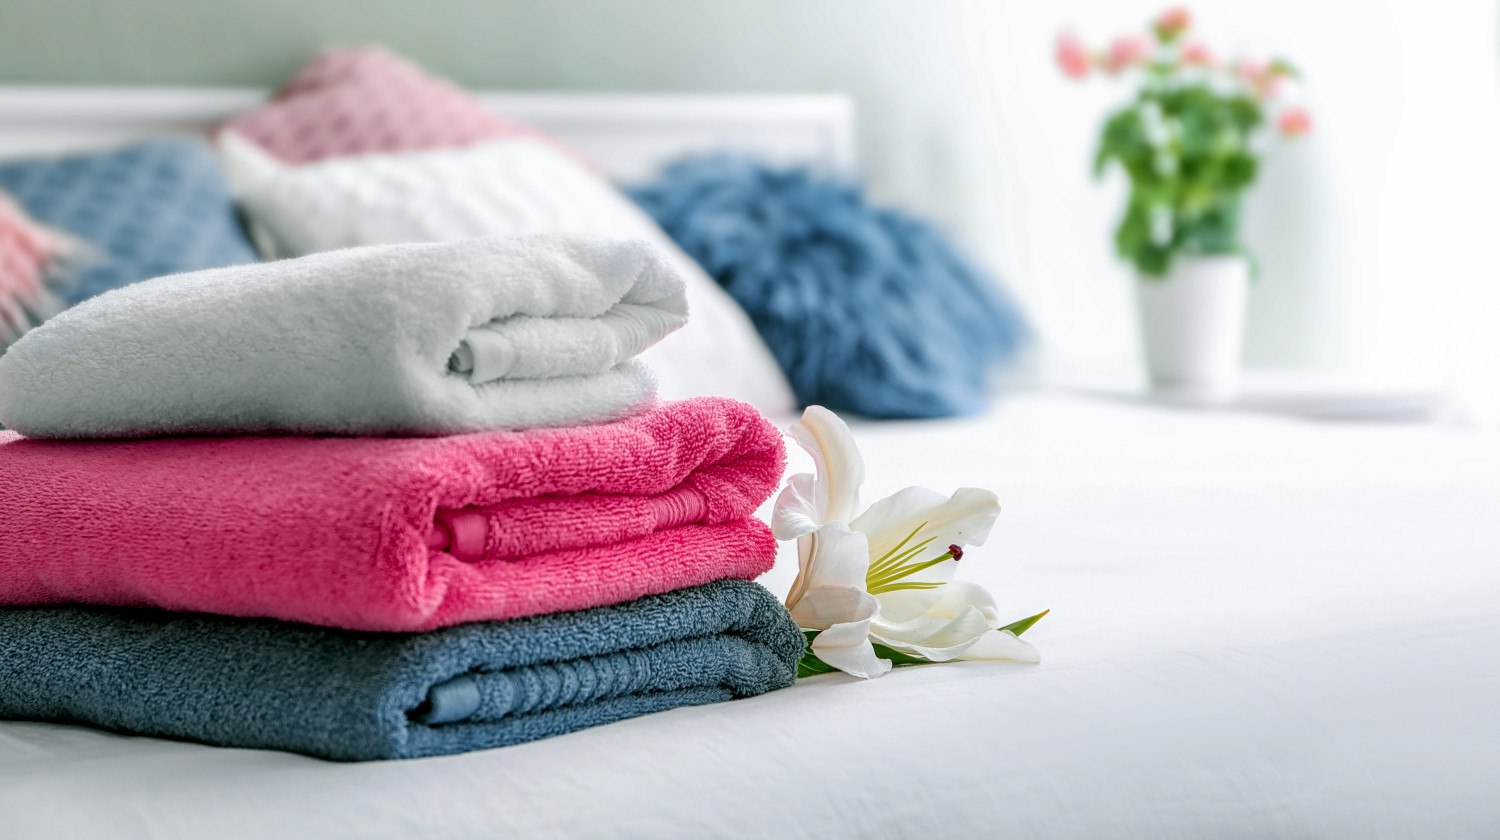 Featured | Stack of clean towels on bed | How To Fold Towels | Step by Step Guide